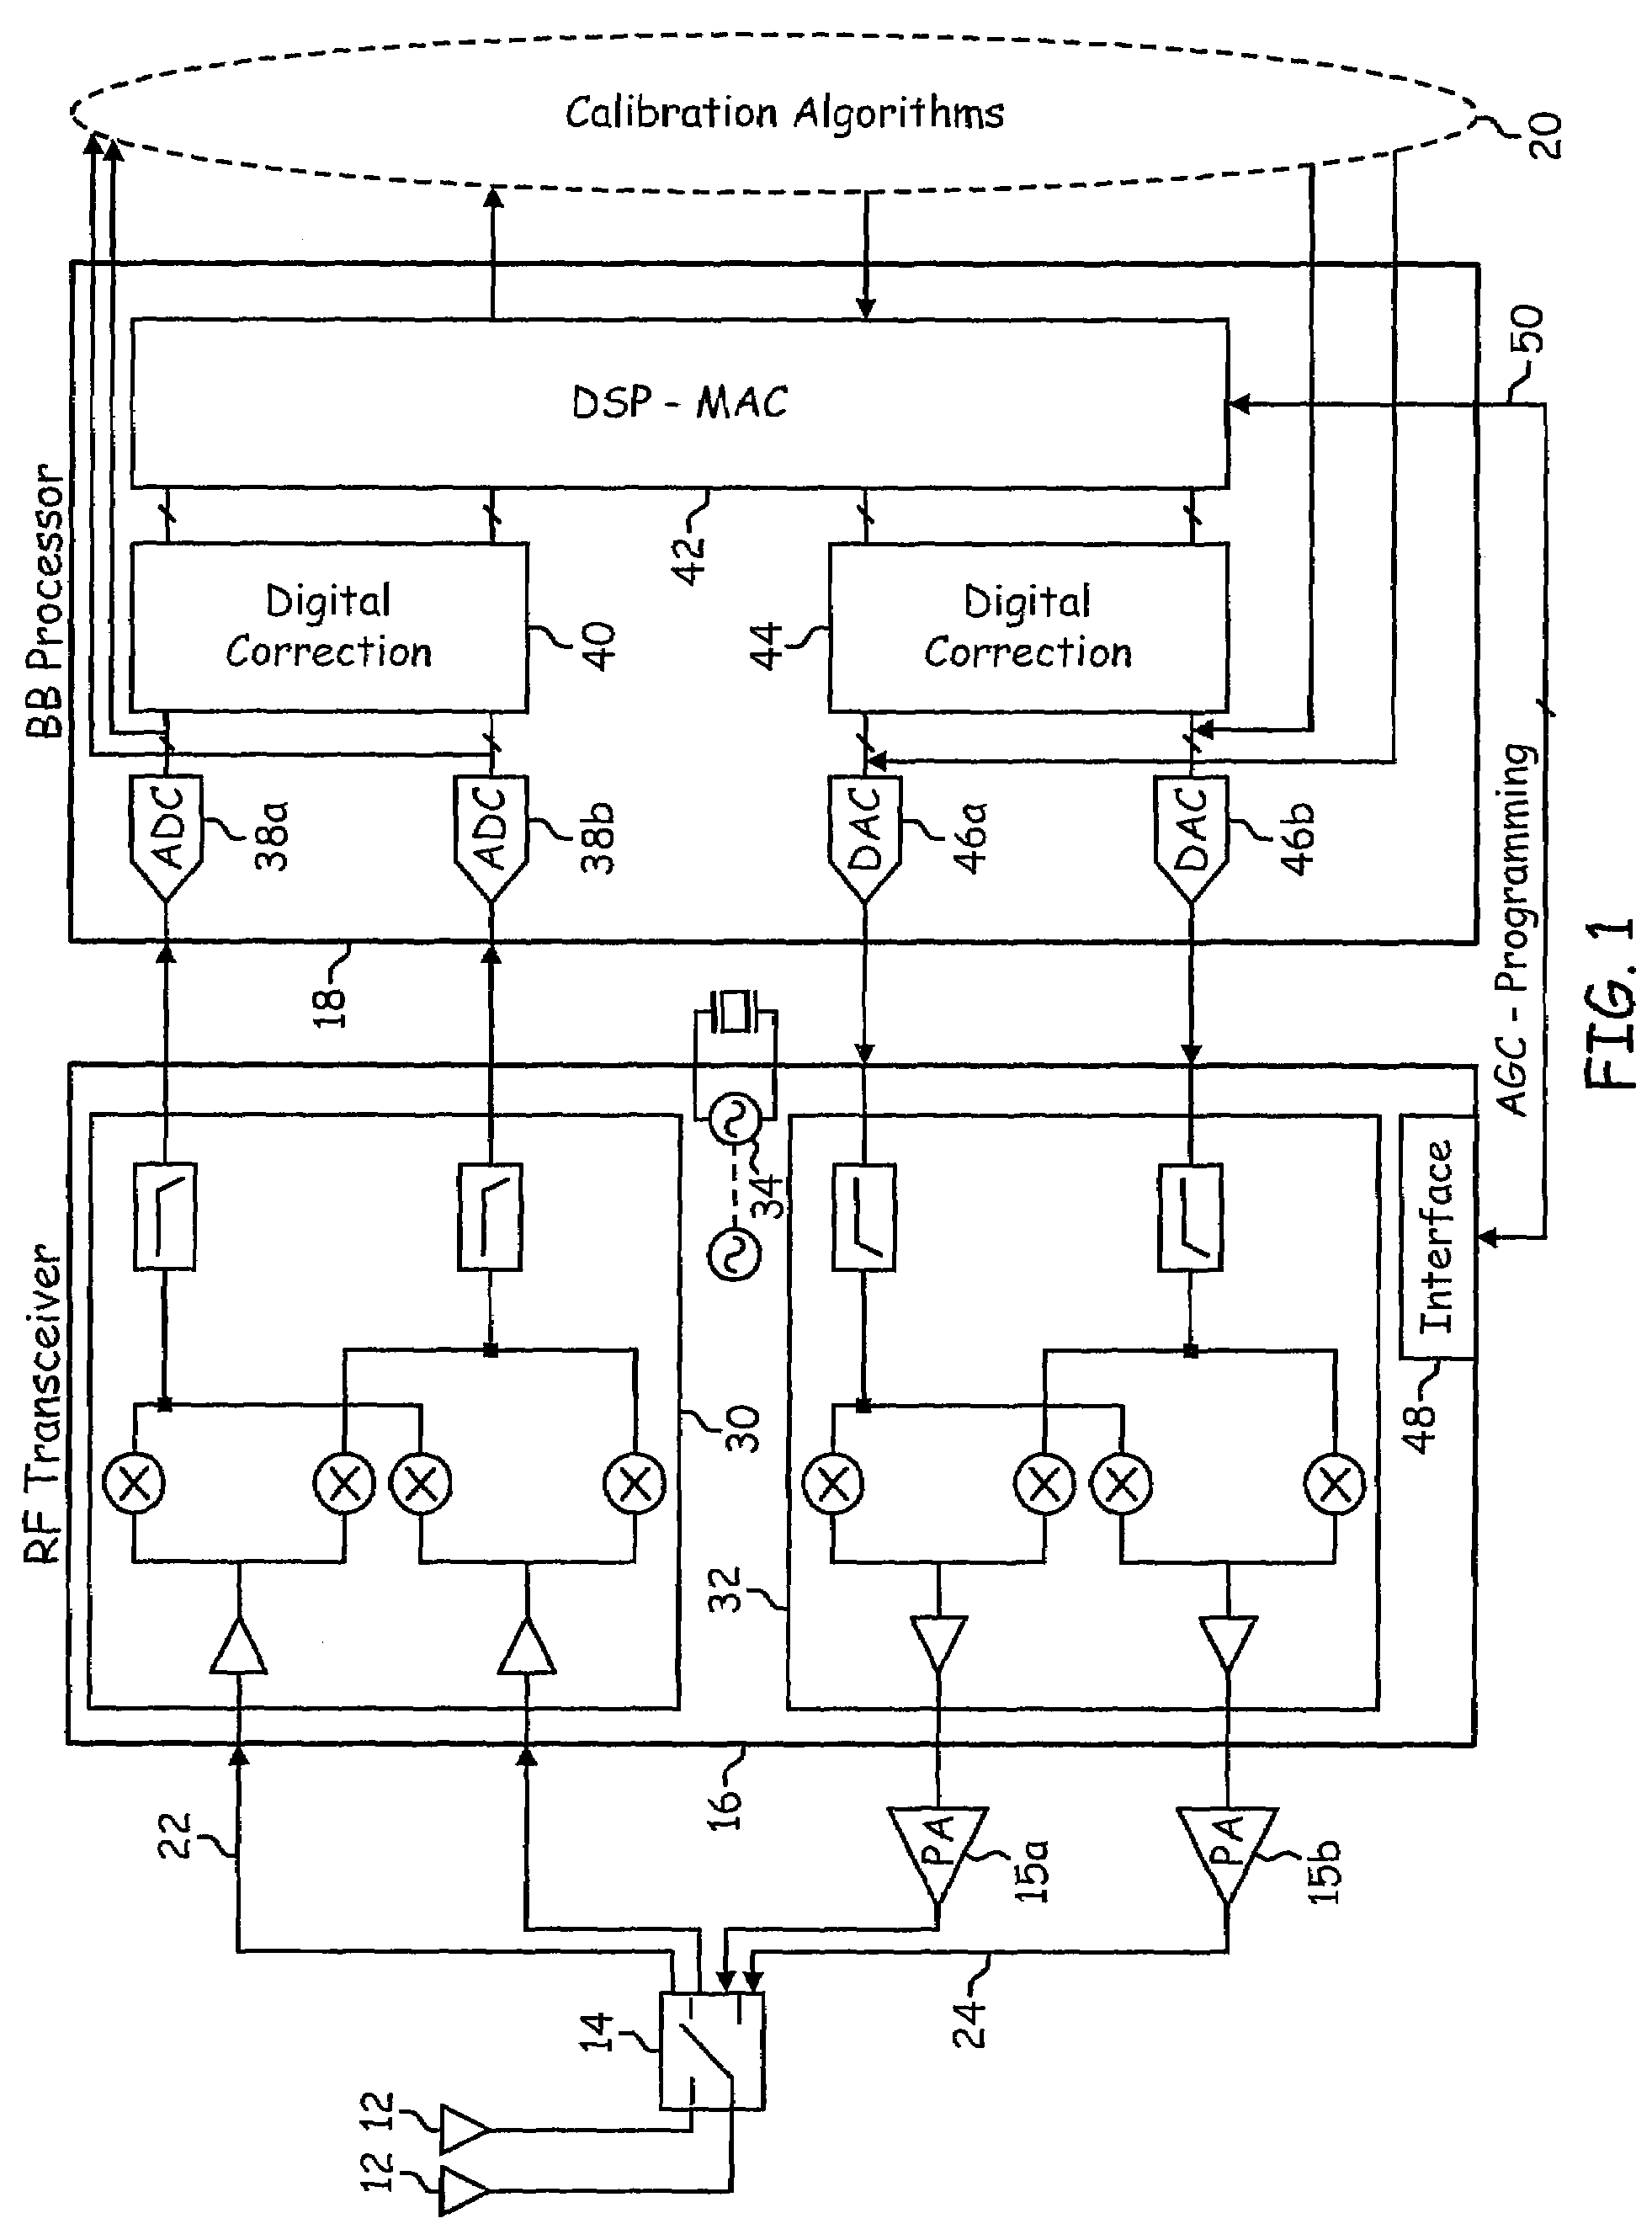 Modified dual band direct conversion architecture that allows extensive digital calibration